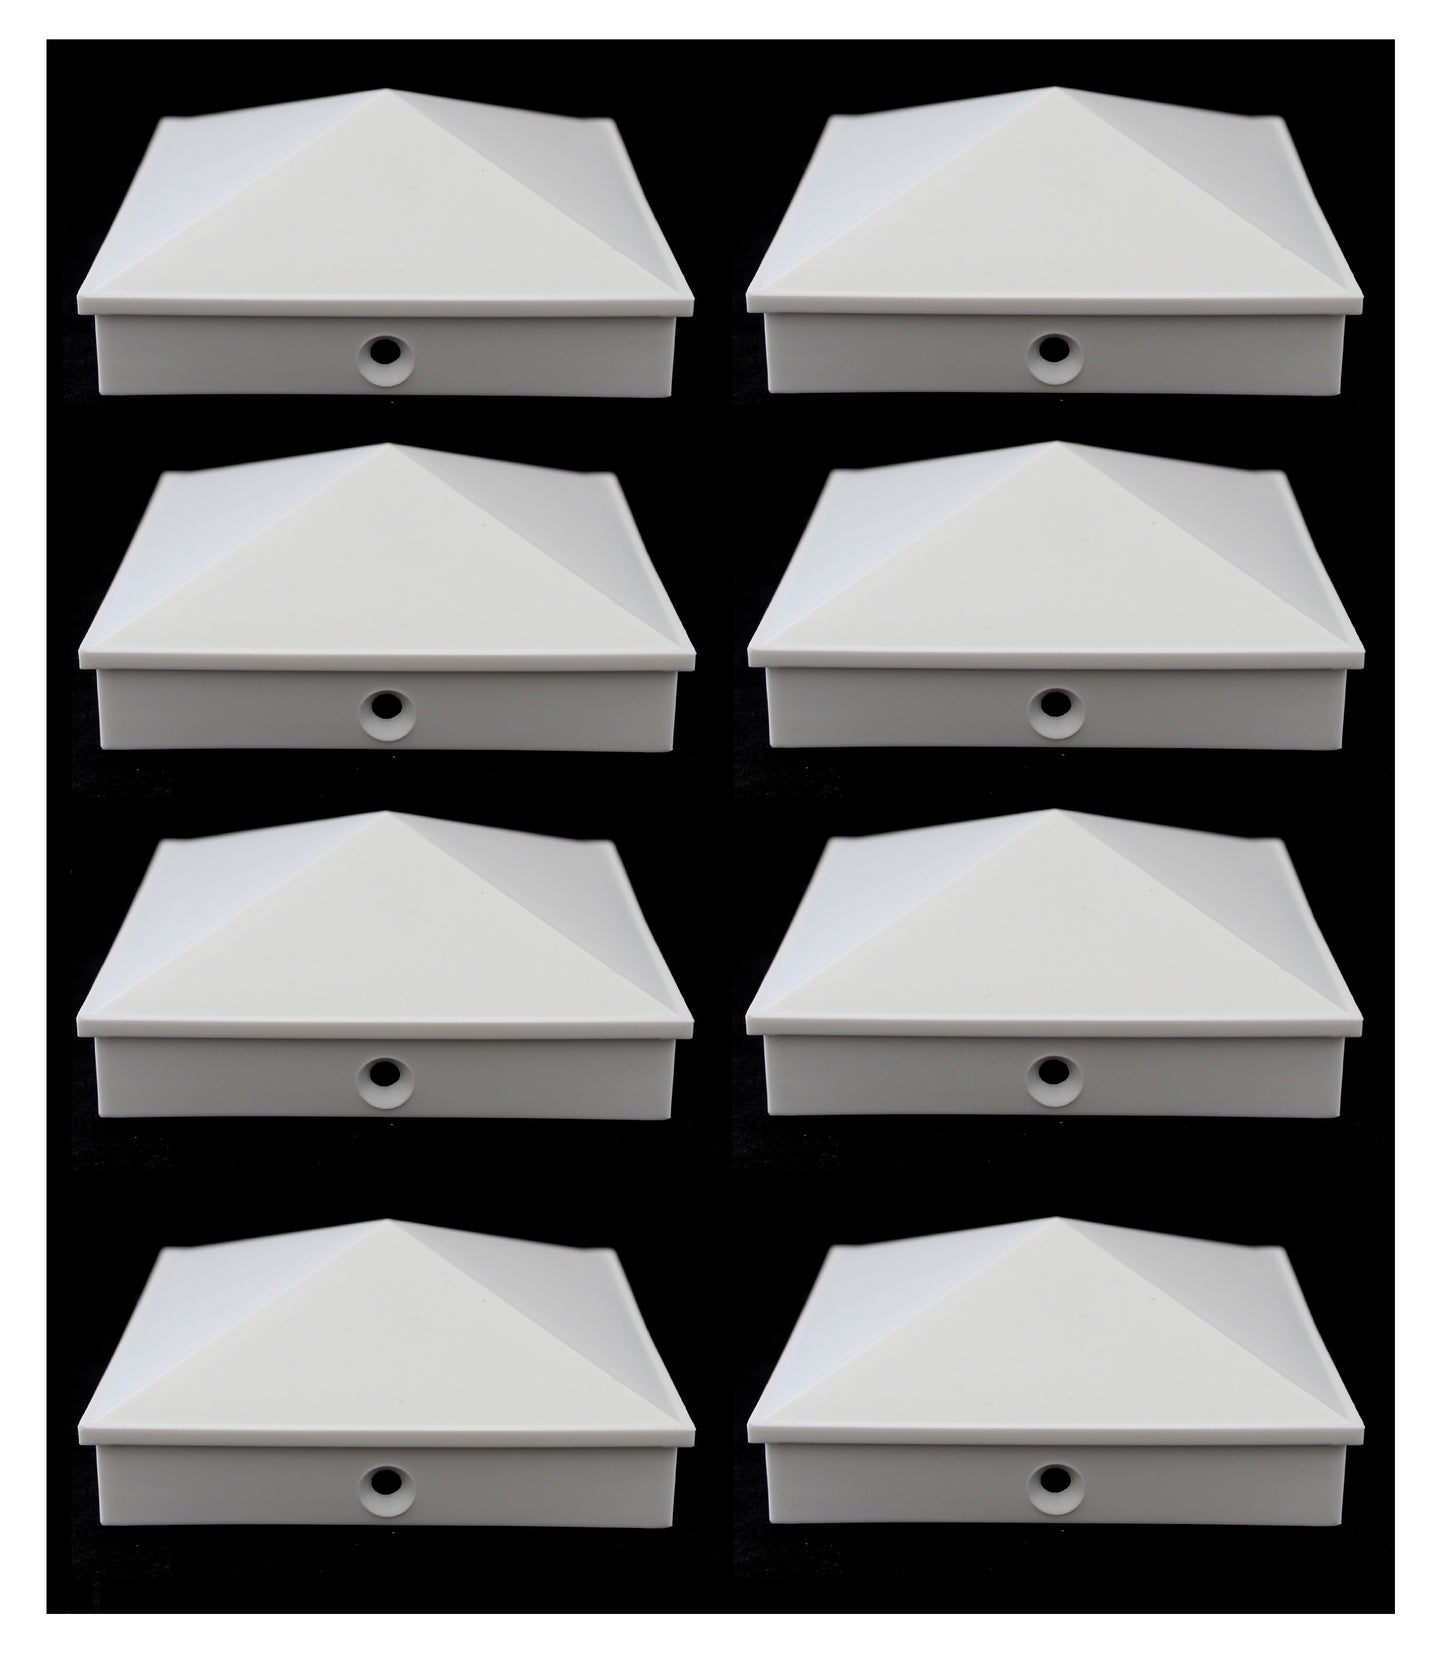 6x6 Nominal (5.5"x5.5") Pyramid Vinyl Fence Post Cap w/ Pre-Drilled Hole for Nominal 6x6 Posts